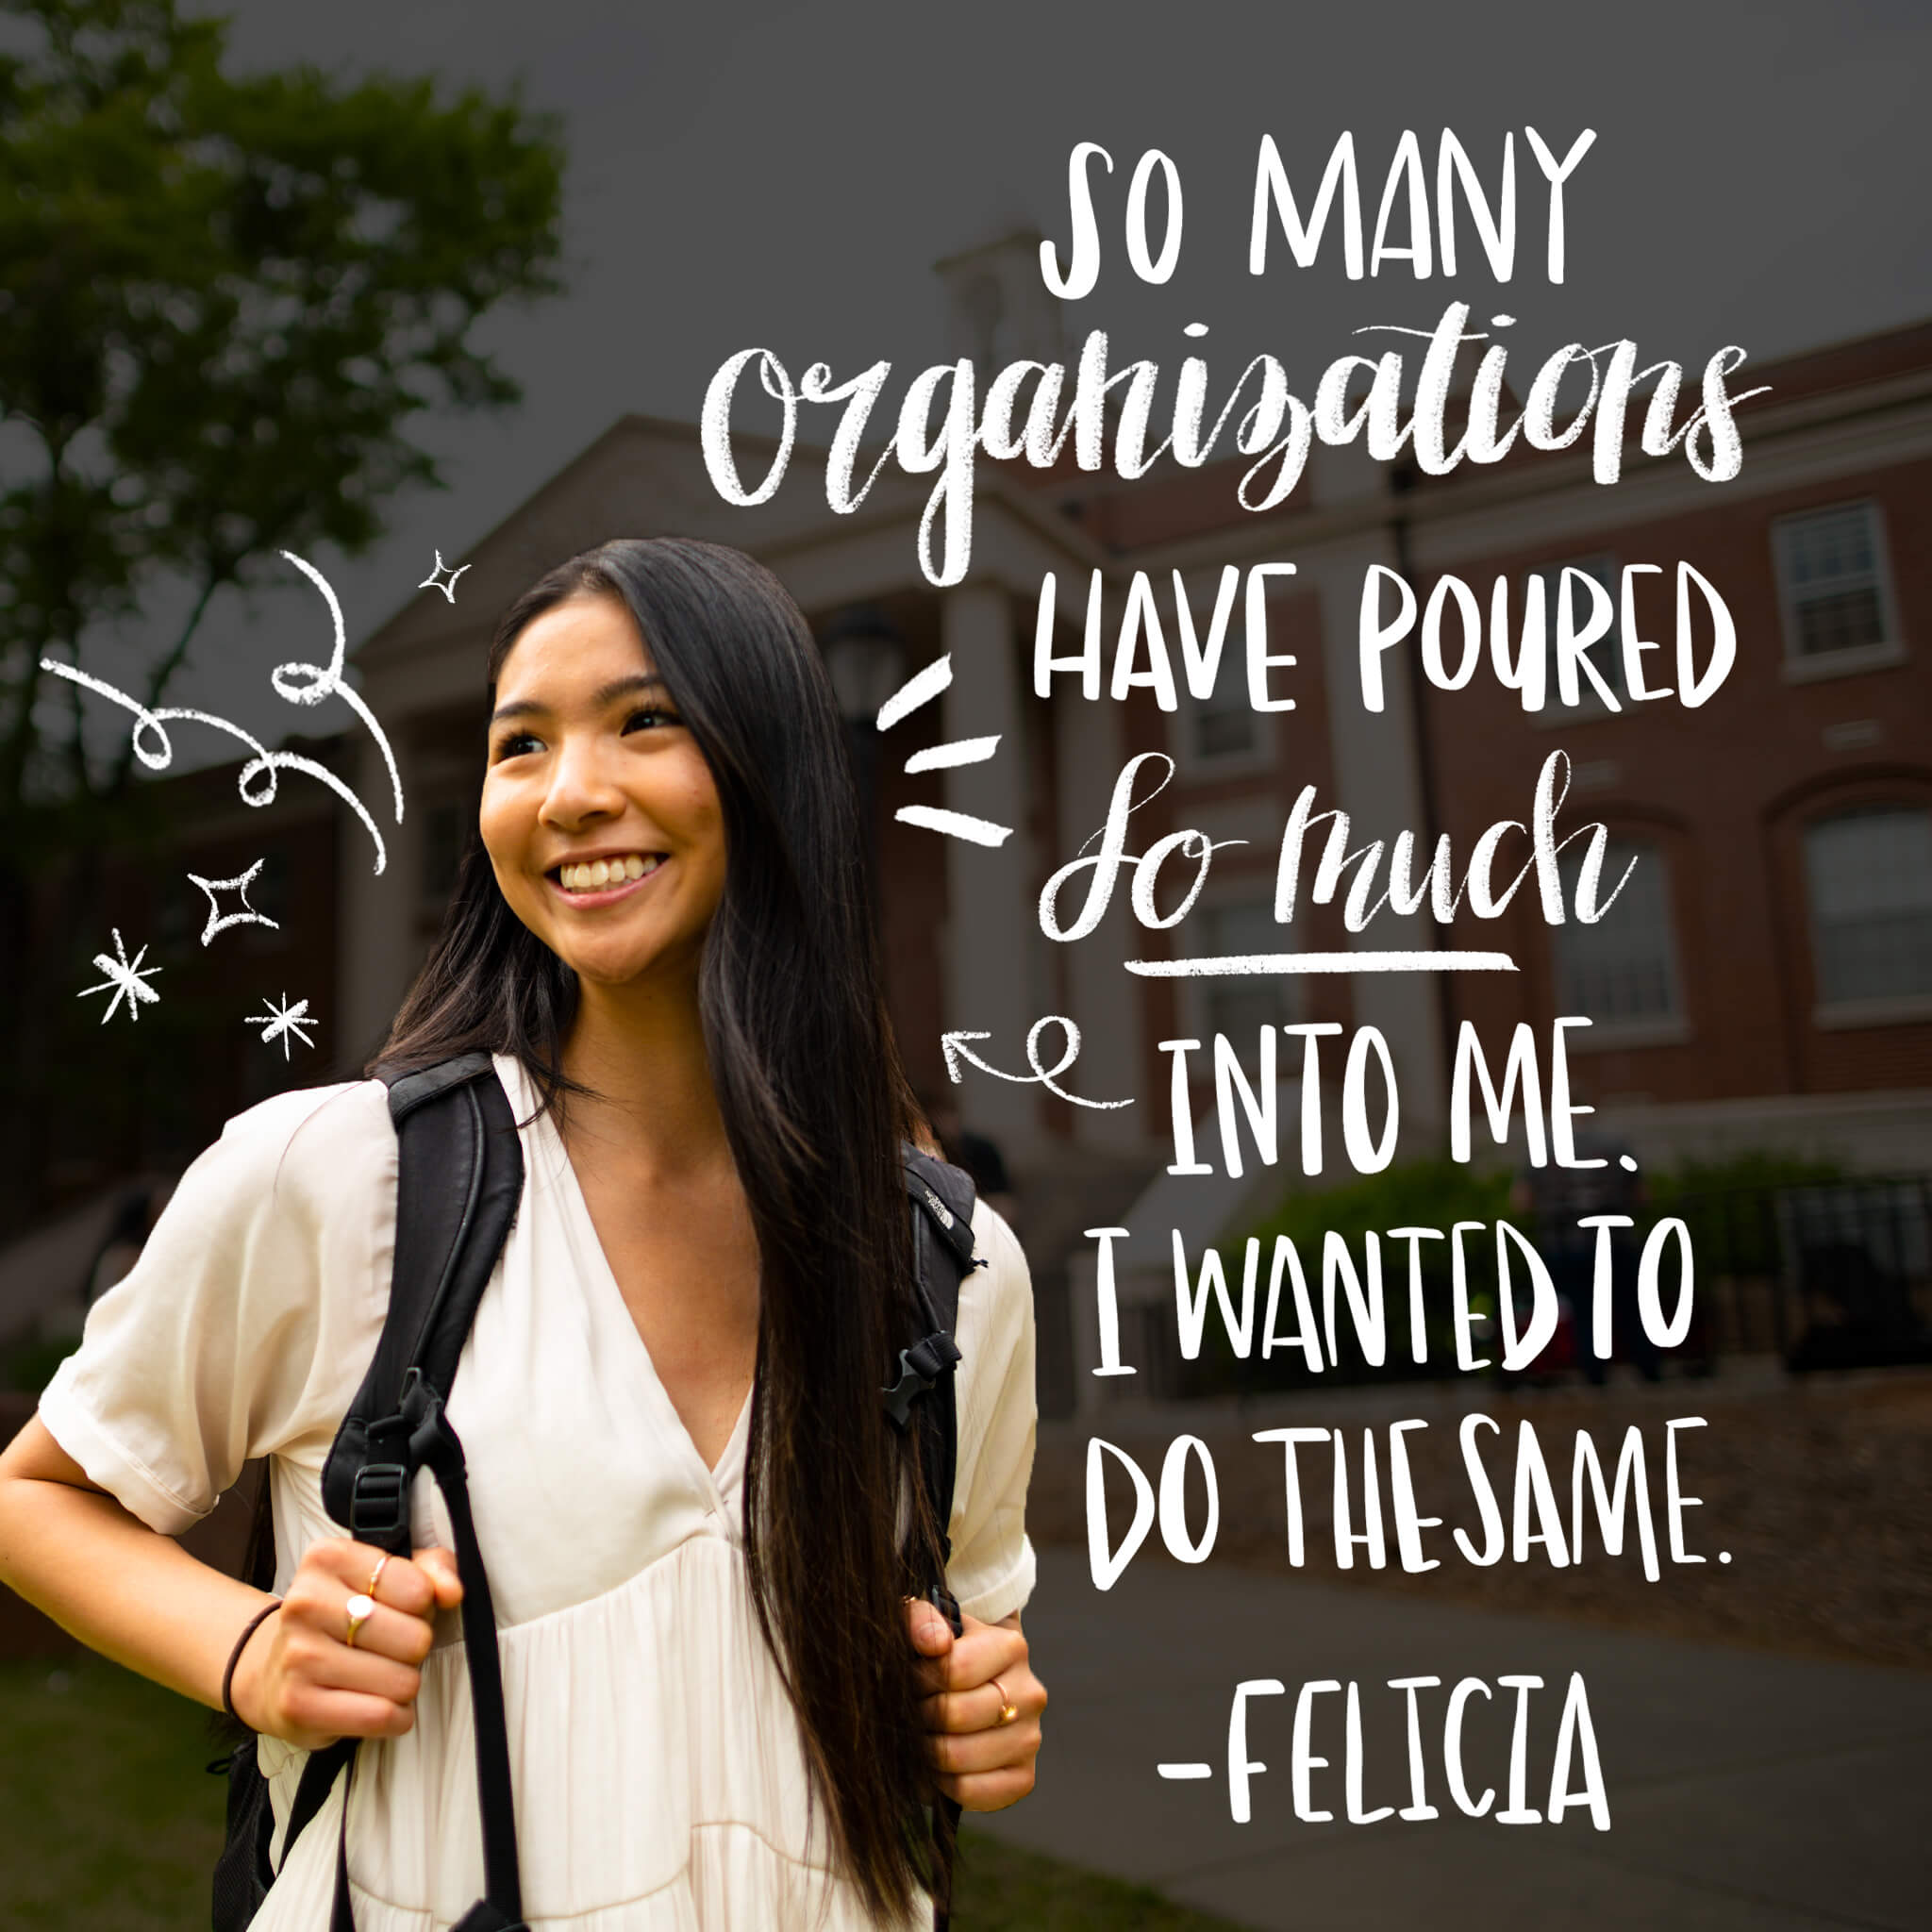 So many organizations have poured so much into me. I wanted to do the same. - Felicia